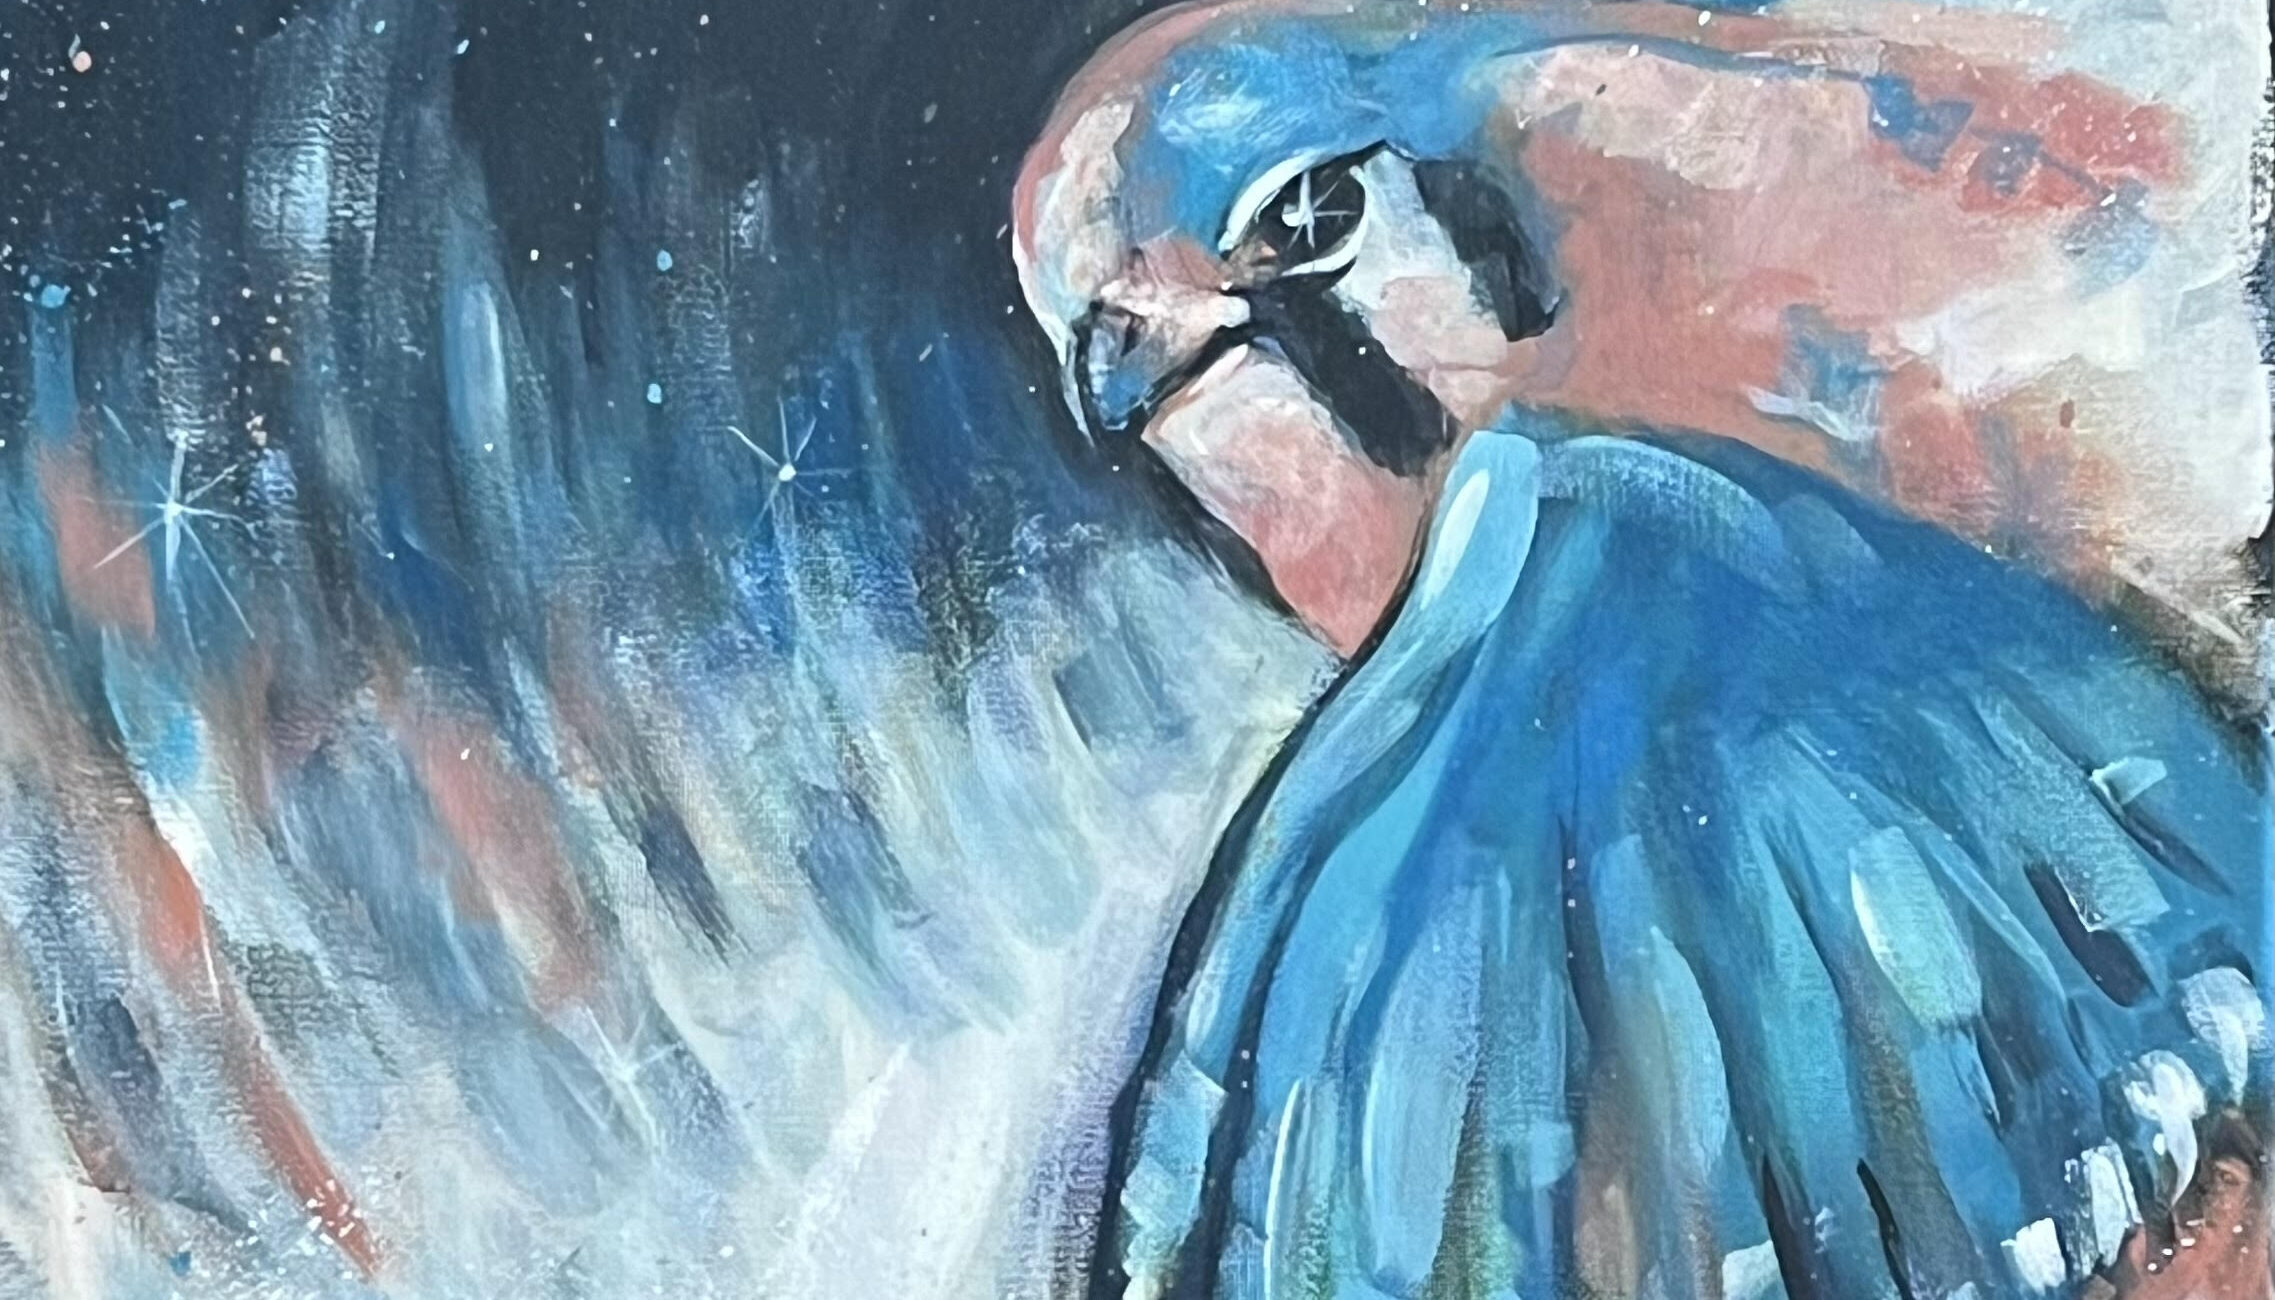 May 19-Create For A Cause at The Raptor Trust! COMING SOON! of a blue and grey bird with a vibrant cosmic background, featuring stars and sweeping lines of light.